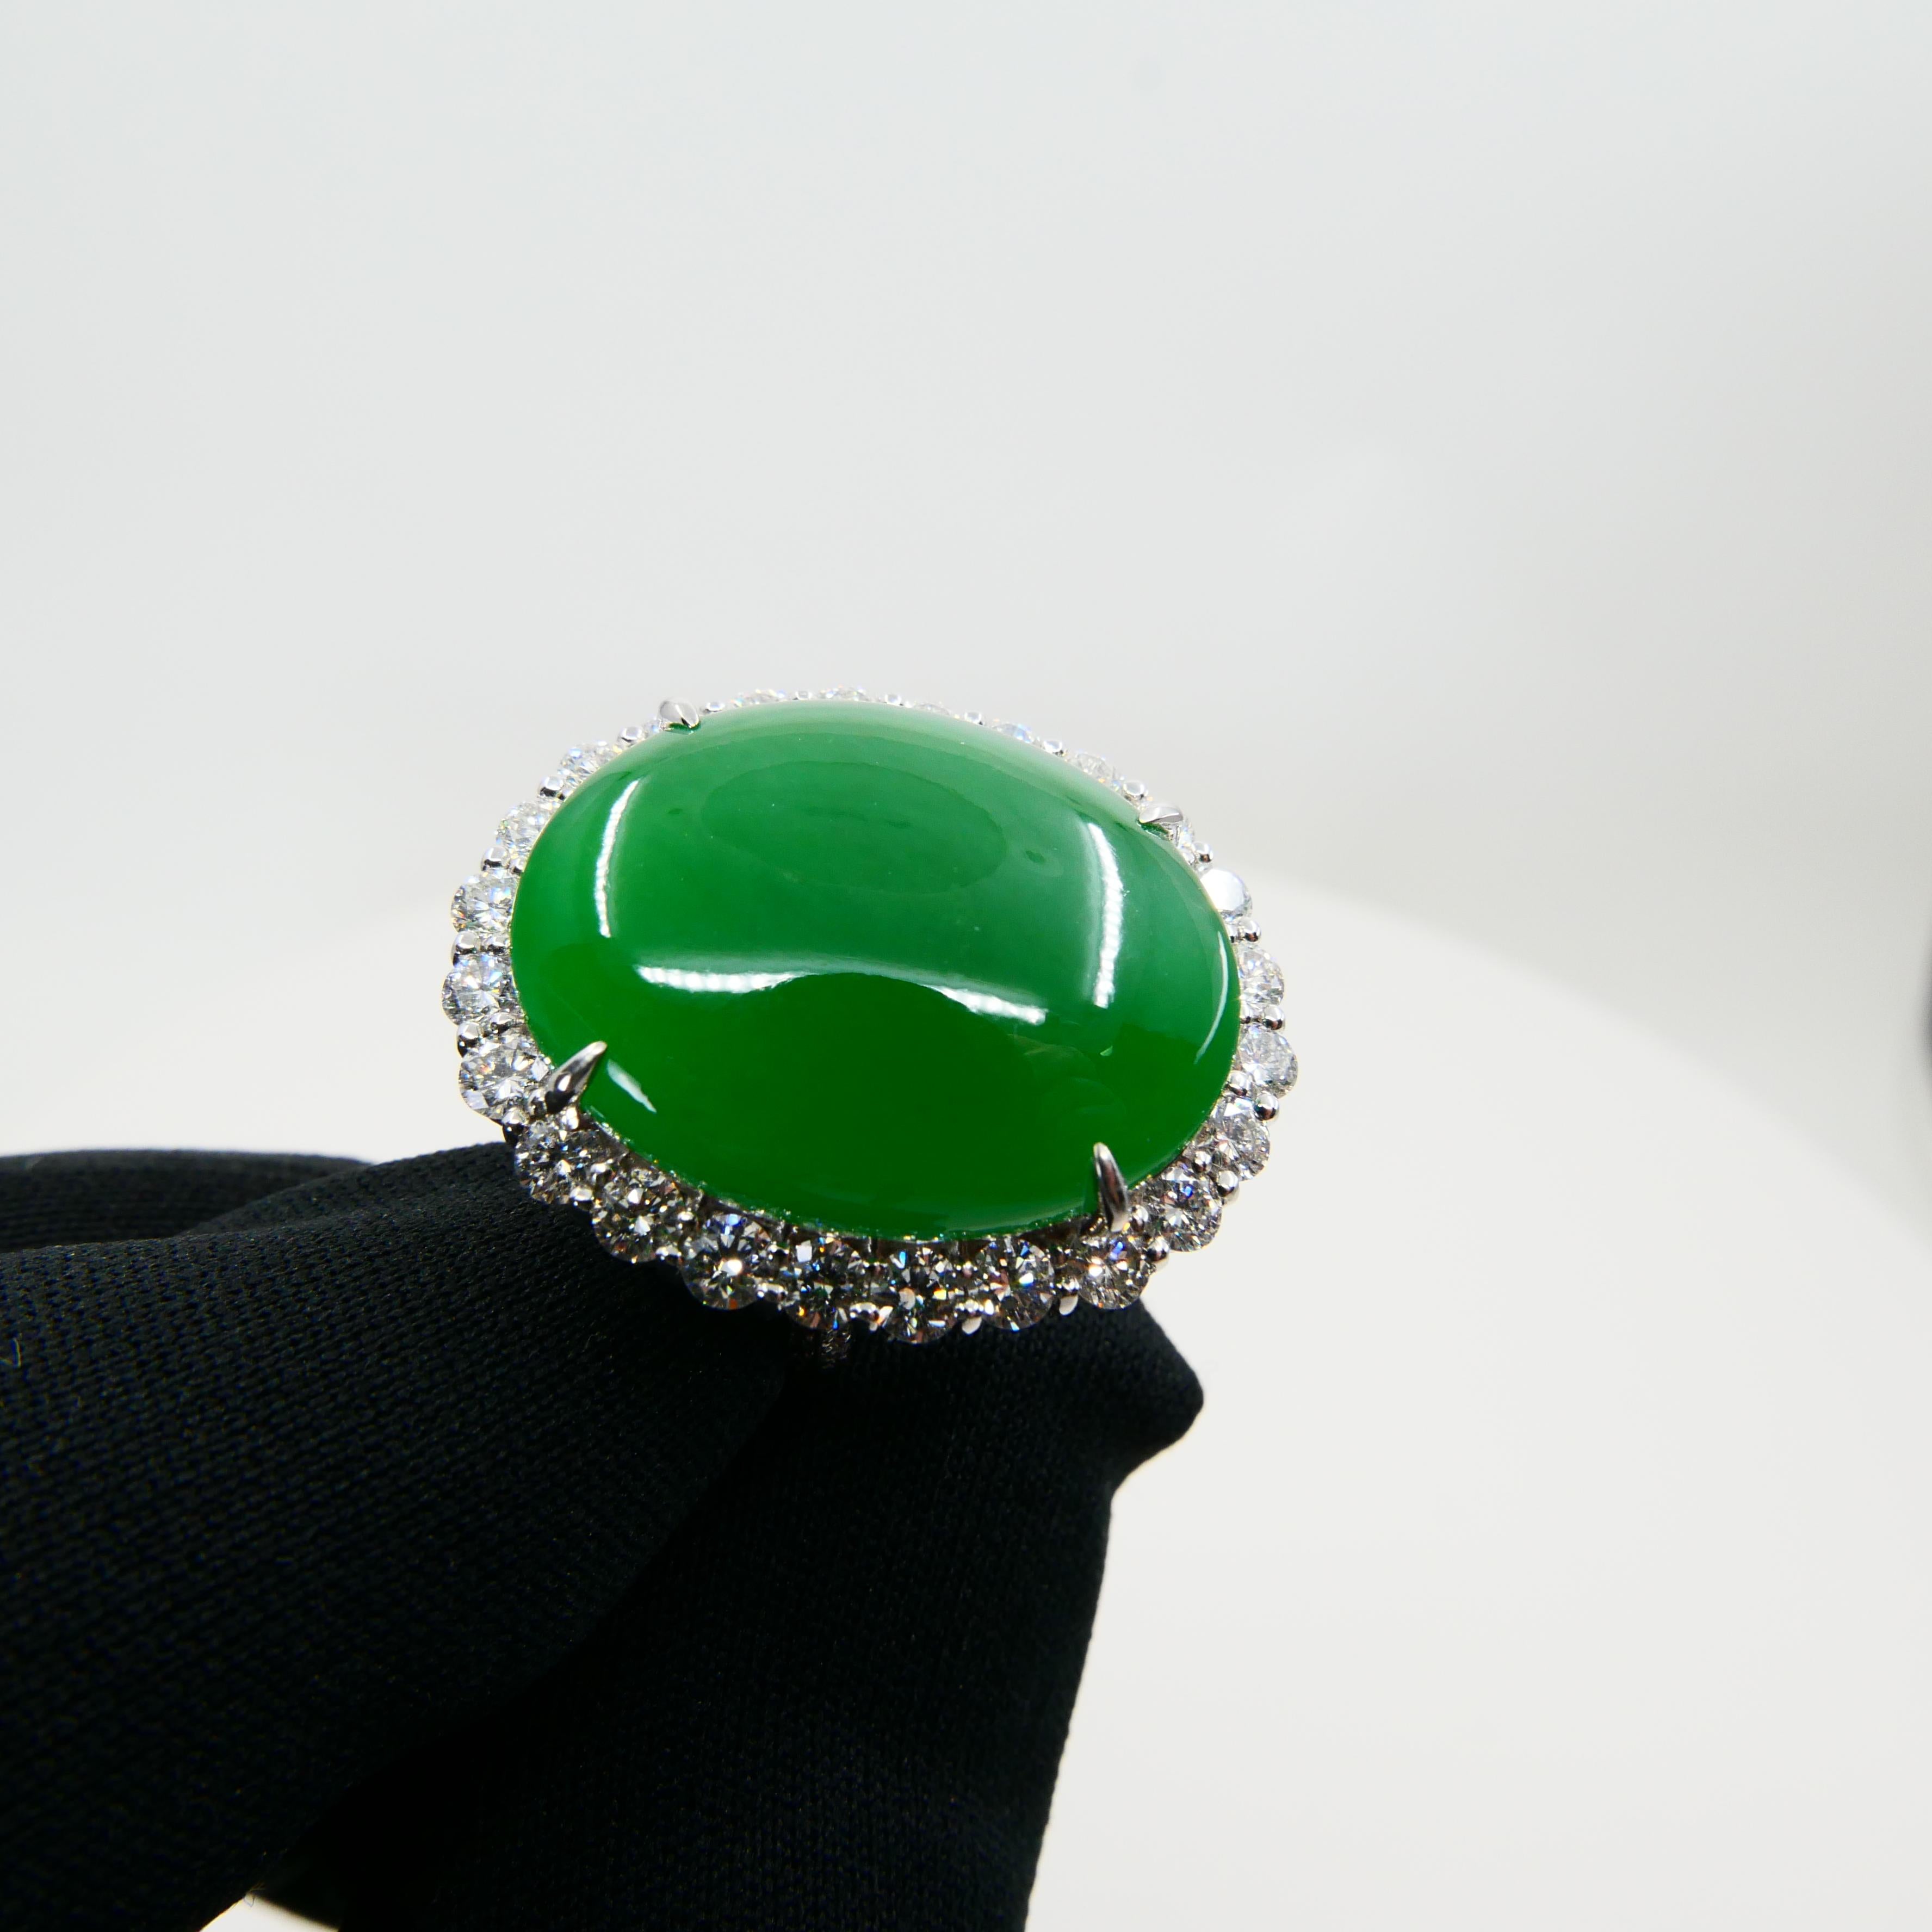 Certified 21 Cts Jade & Diamond Cocktail Ring, Intense Apple Green, Massive 8